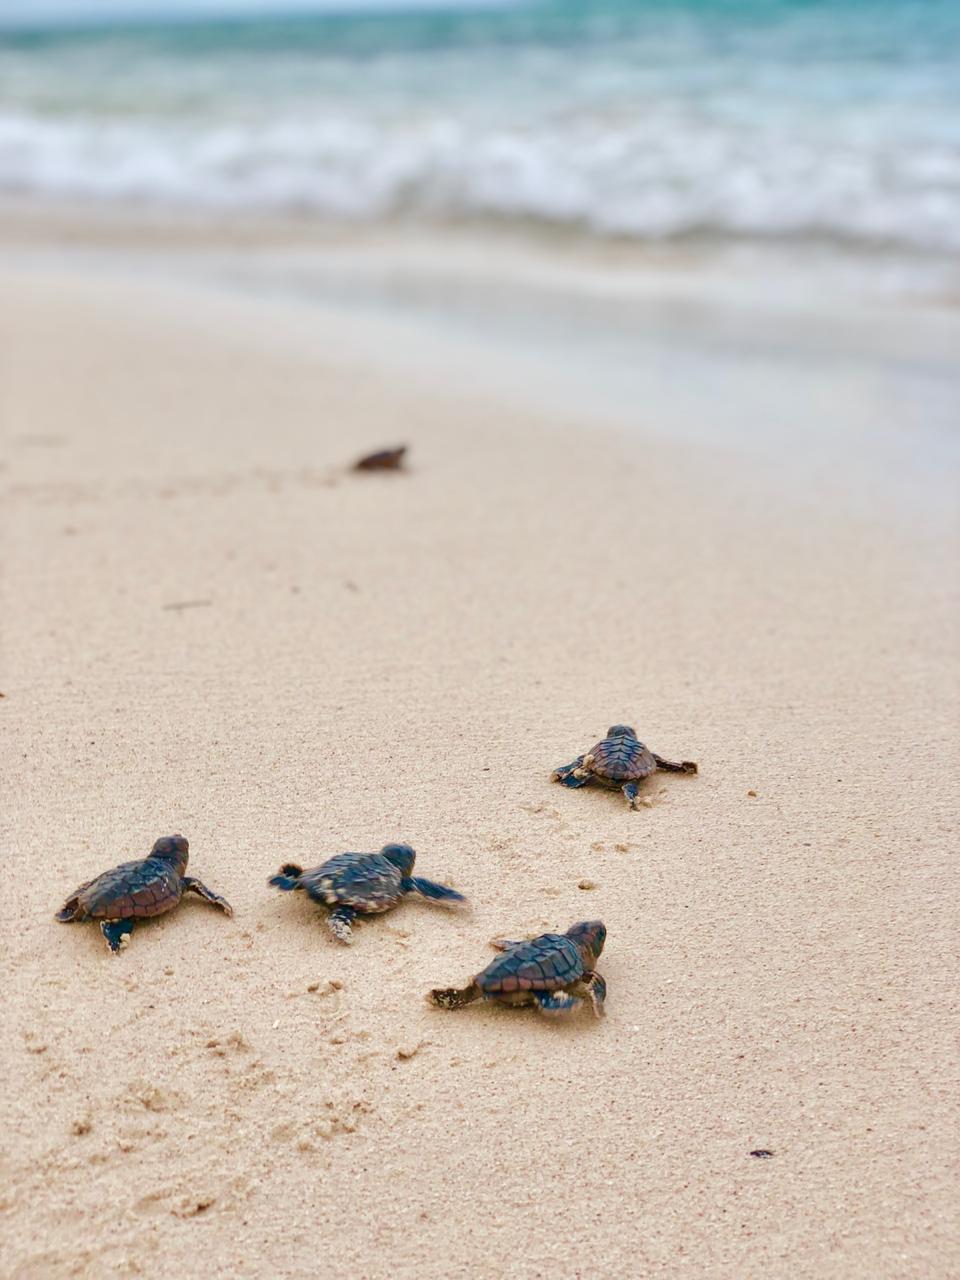 Newly hatched turtles going into the water